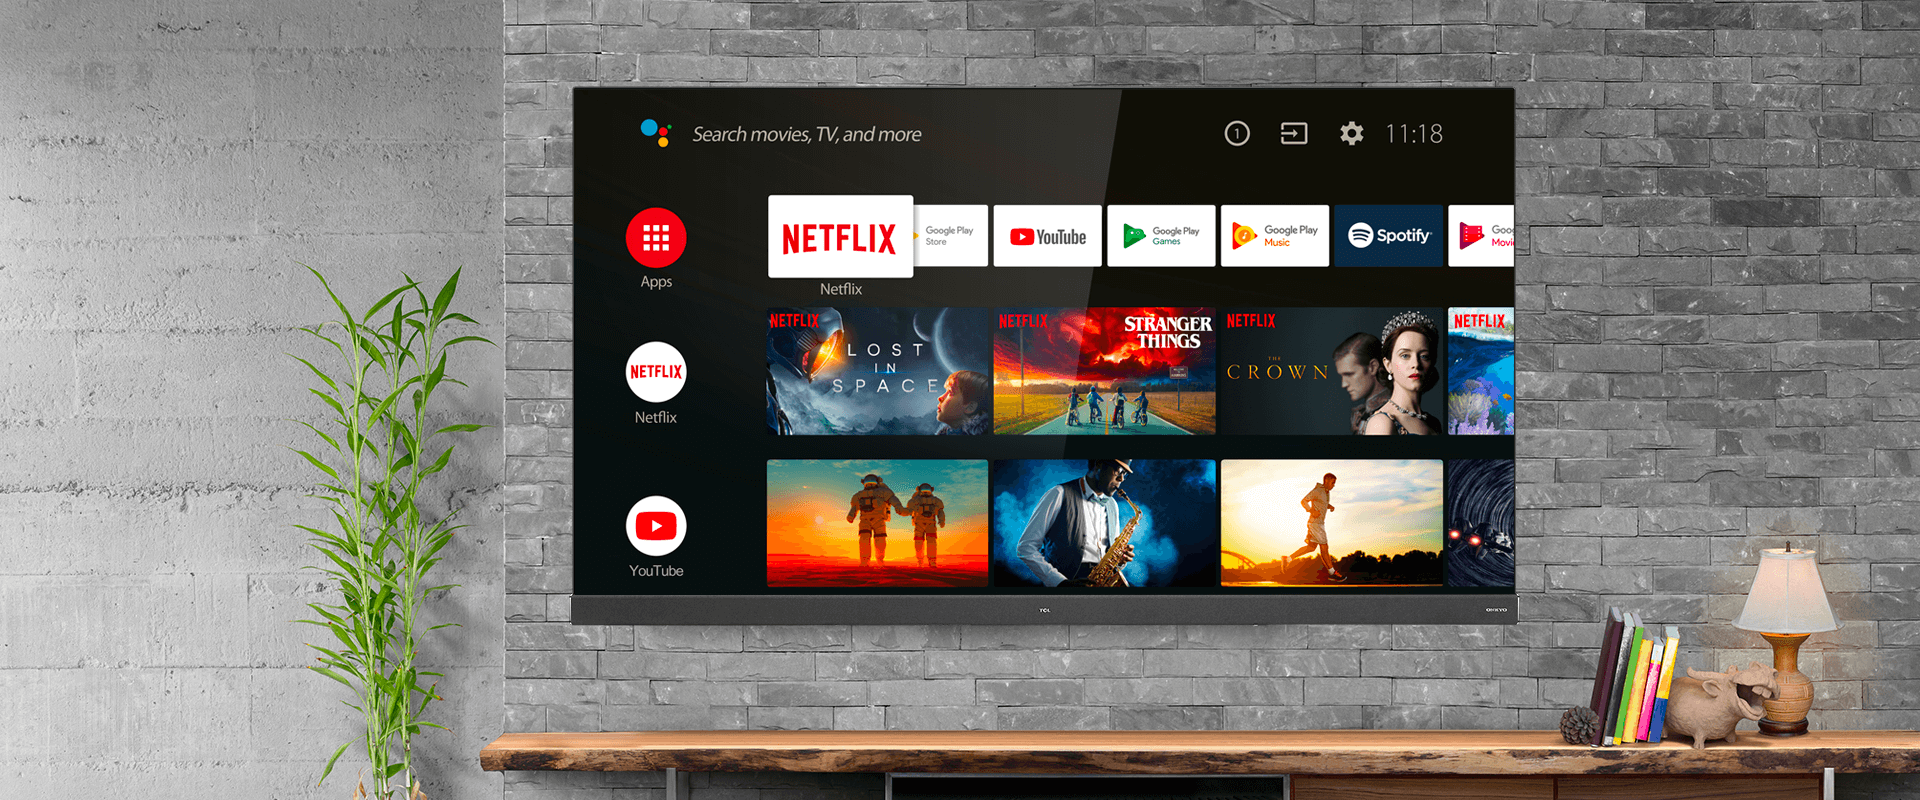 TCL ec780 Android TV